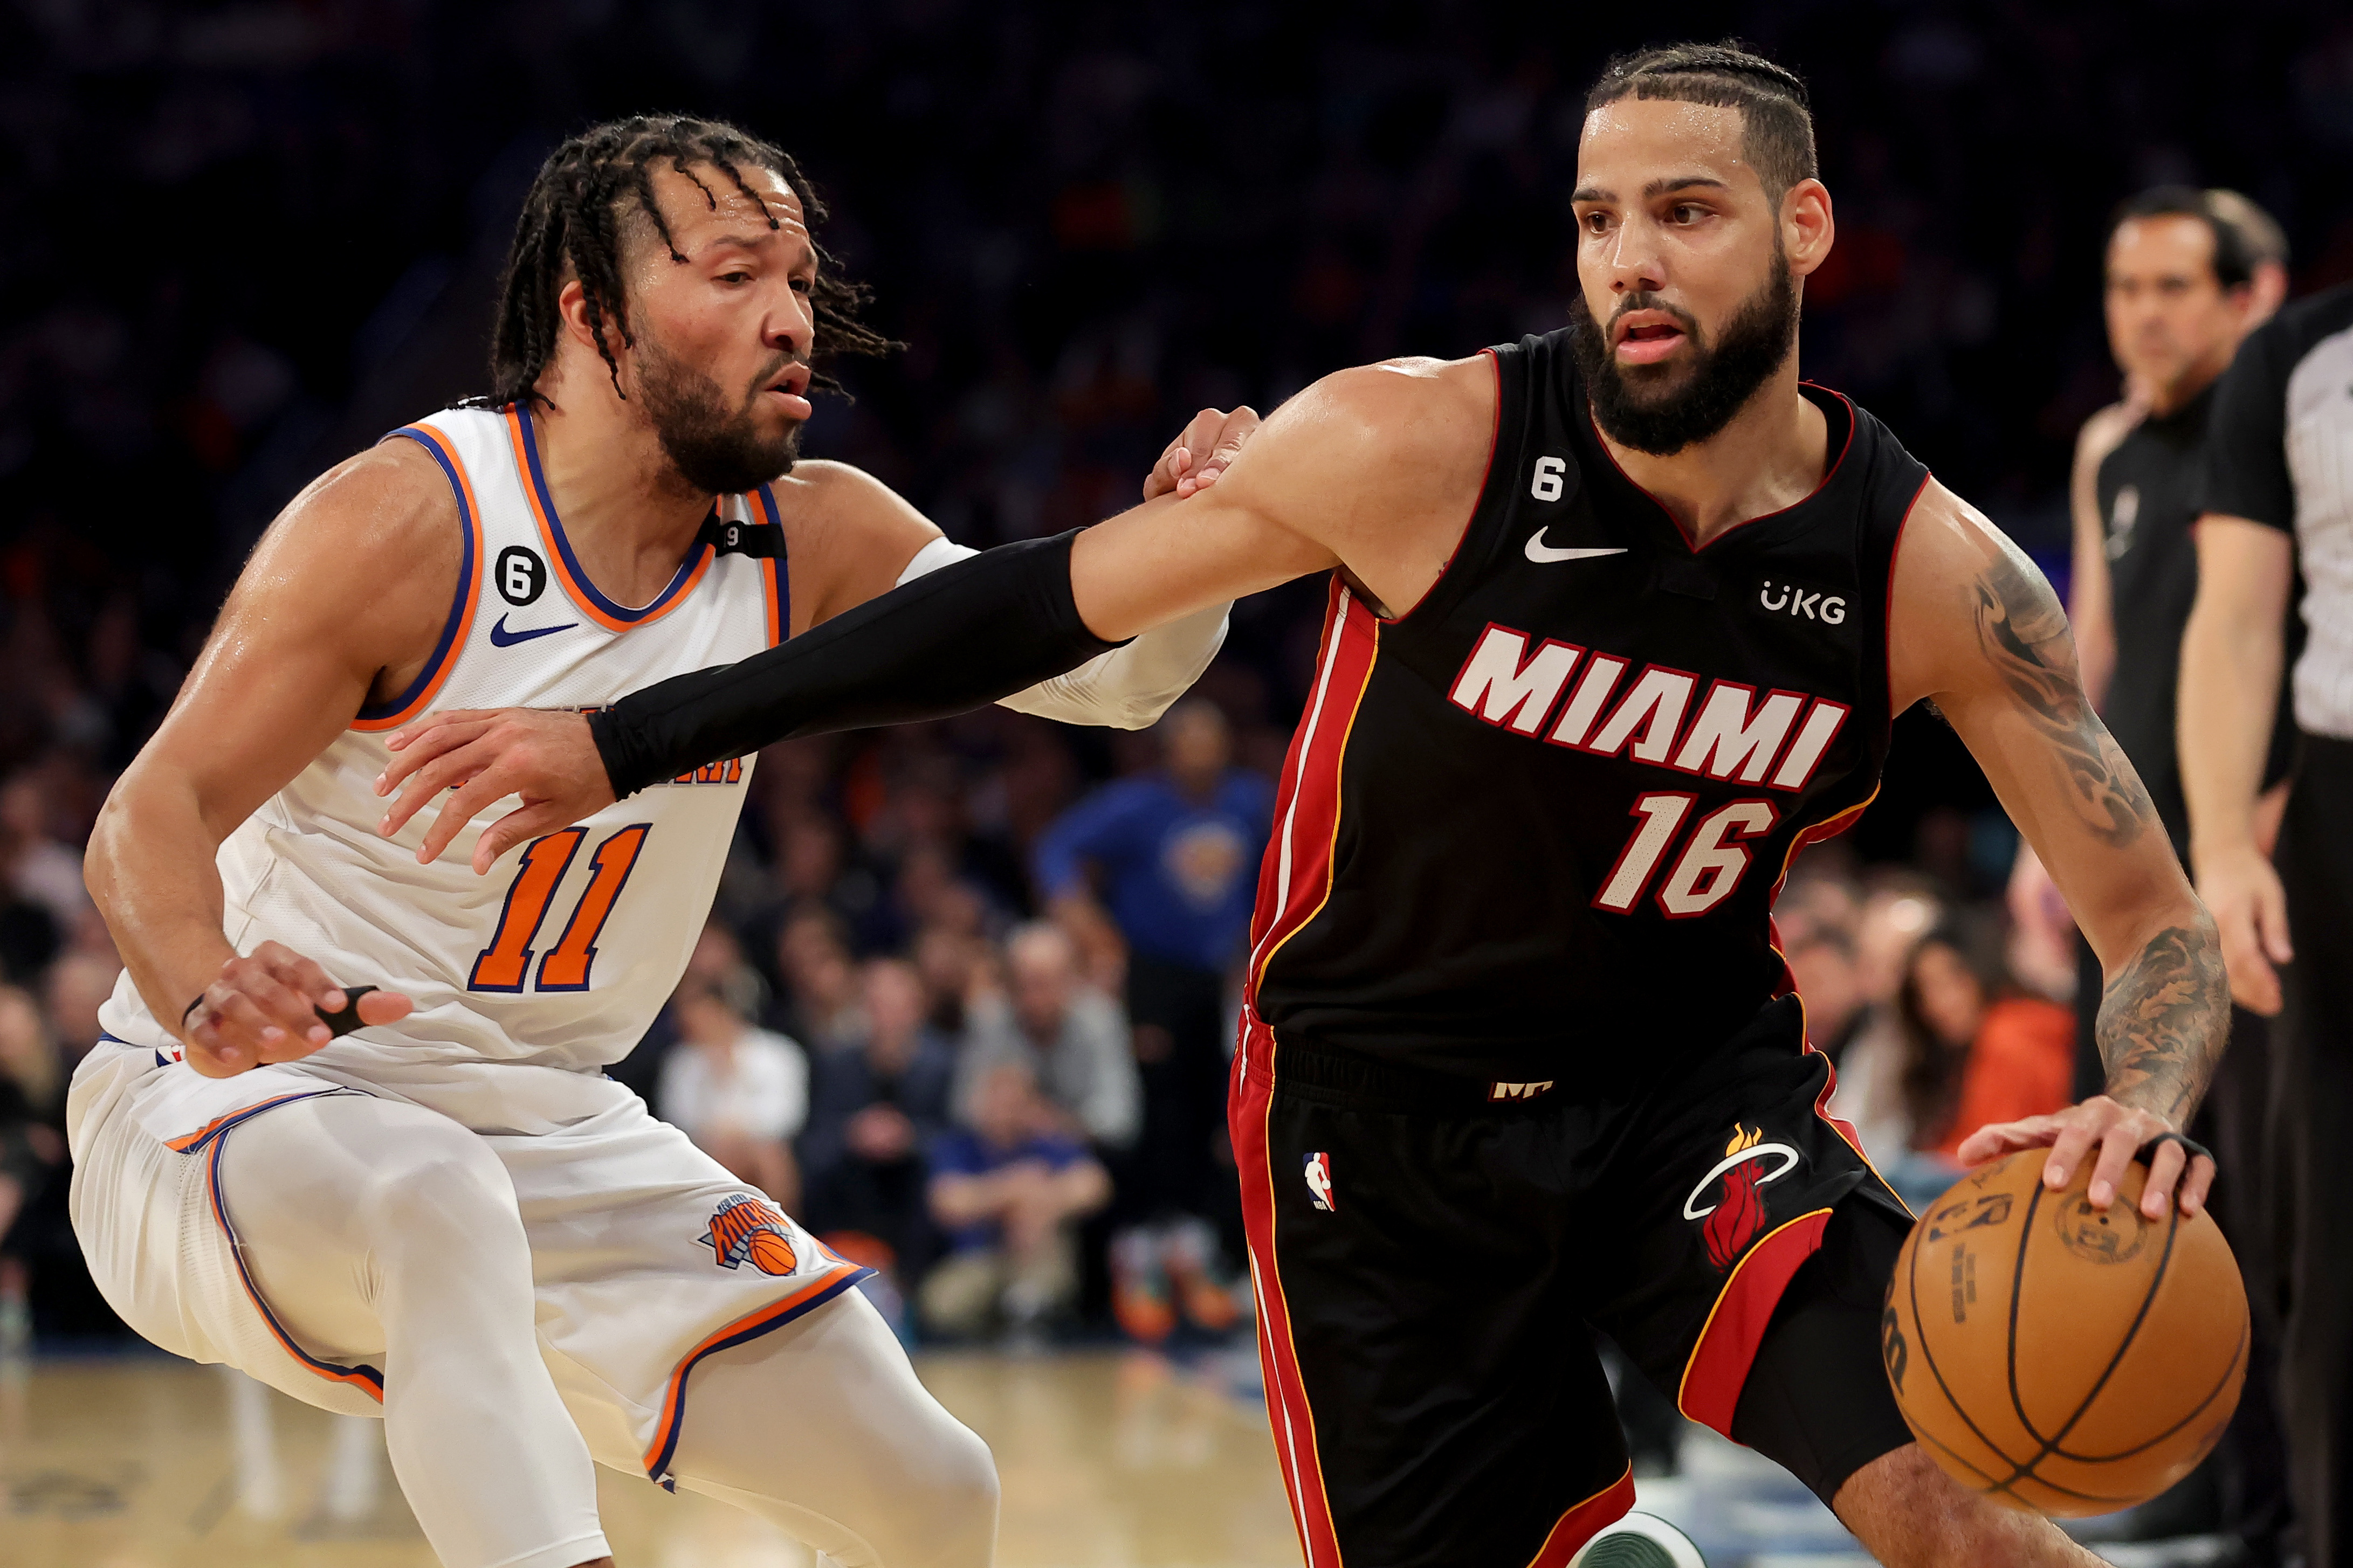 HEAT vs. Knicks Preview: Fresh Off An Unbelievable Upset, The HEAT Draw A Knicks  Team That Presents A Very Different Kind Of Challenge Despite One Very  Familiar Look